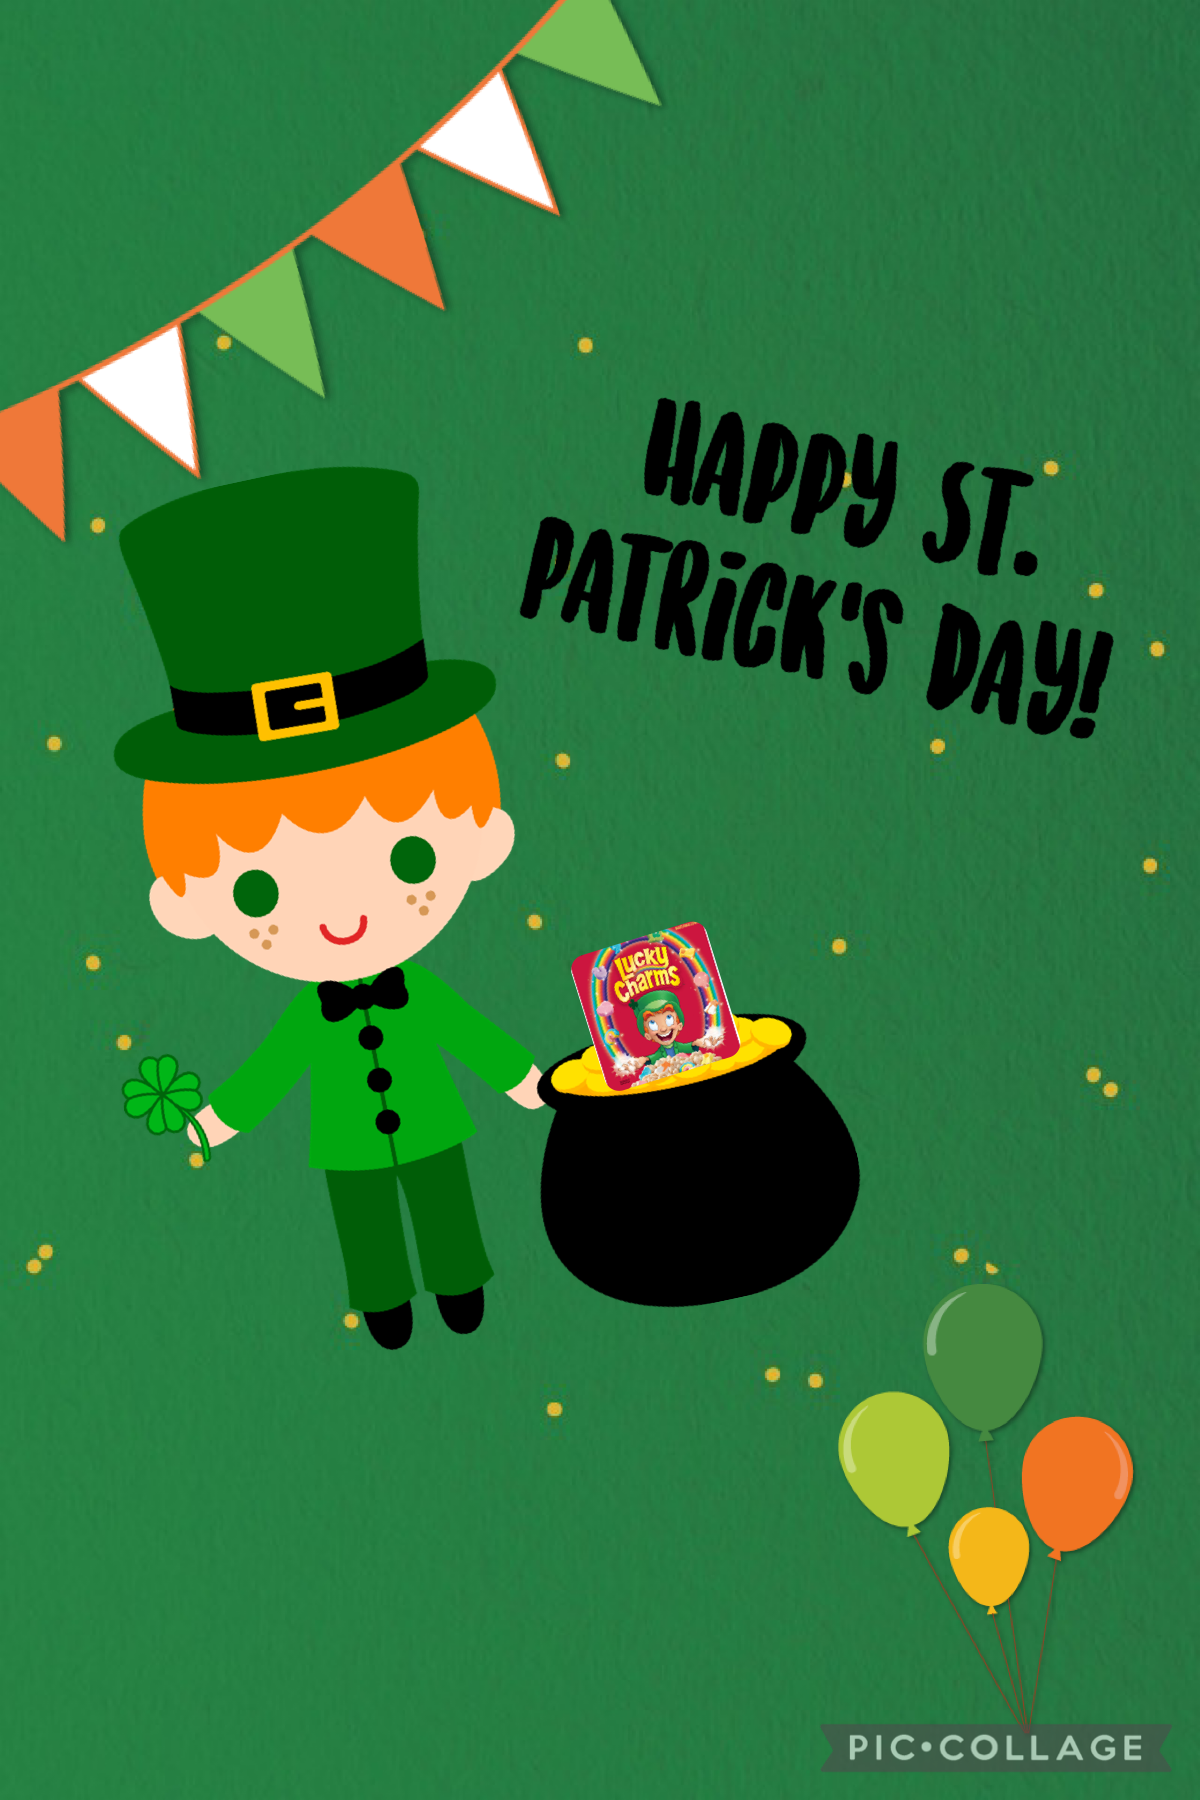 🍀Tap🍀
Happy St. Patrick’s Day! What did the Leprechaun bring you?